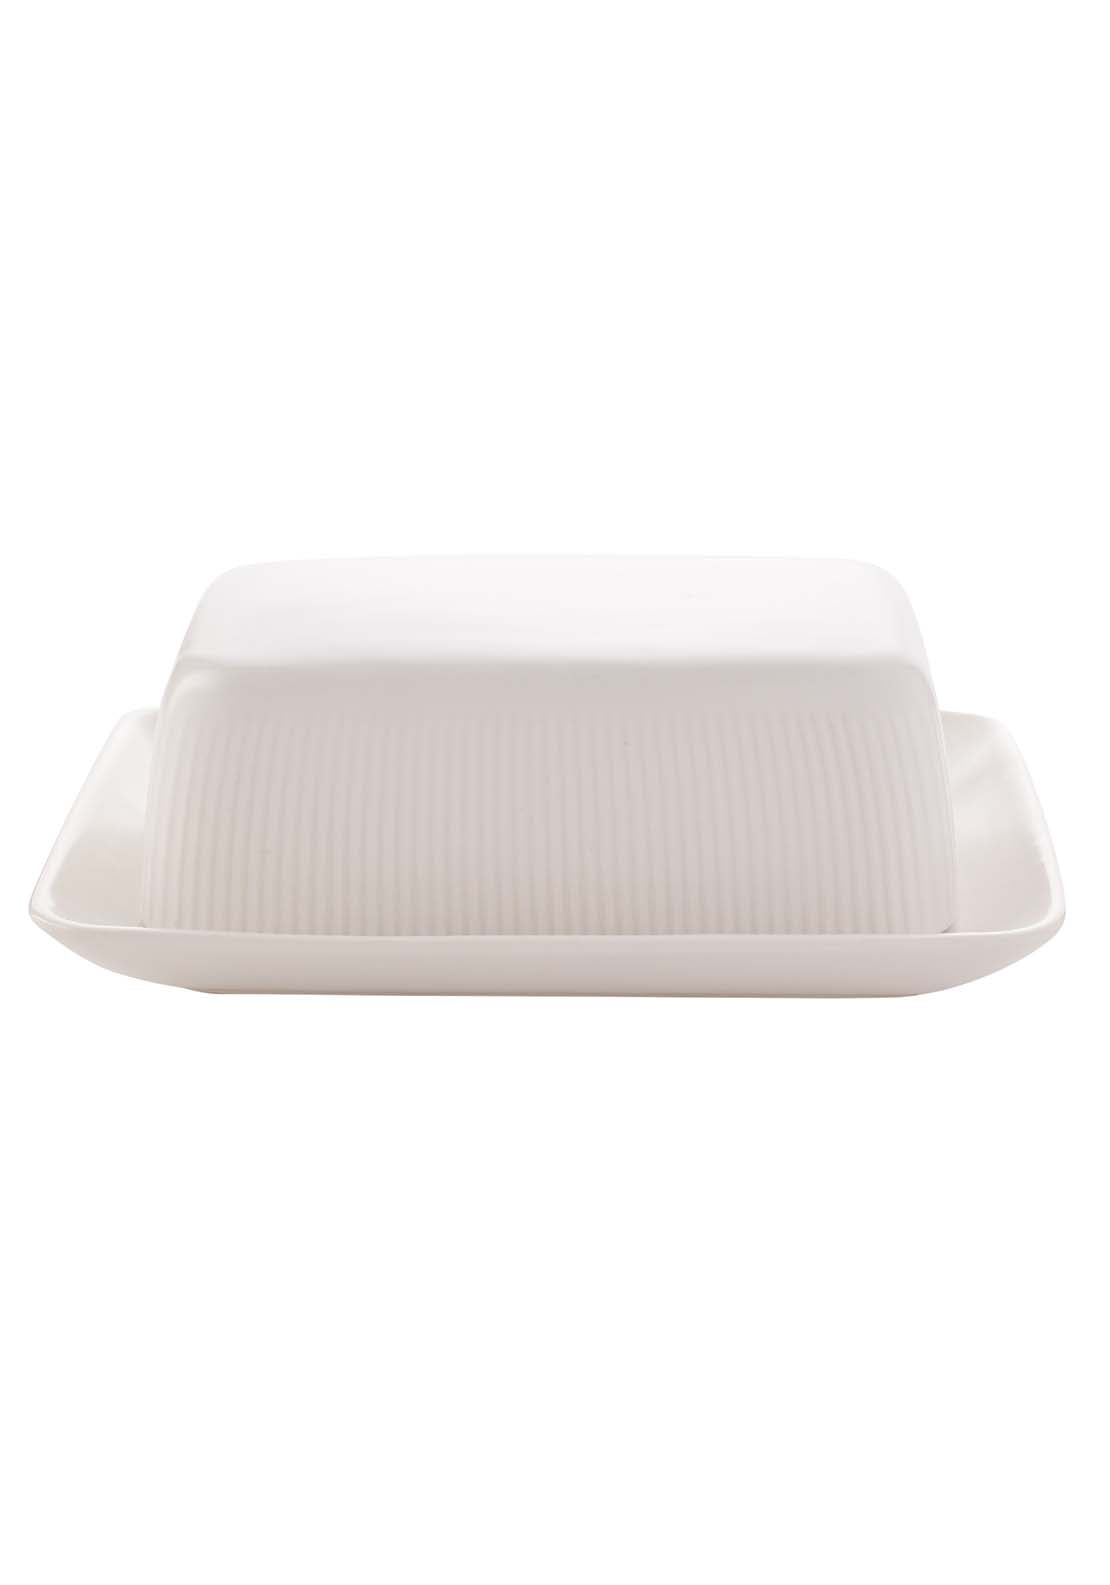 The Home Collection Ribbed Butter Dish - White 3 Shaws Department Stores